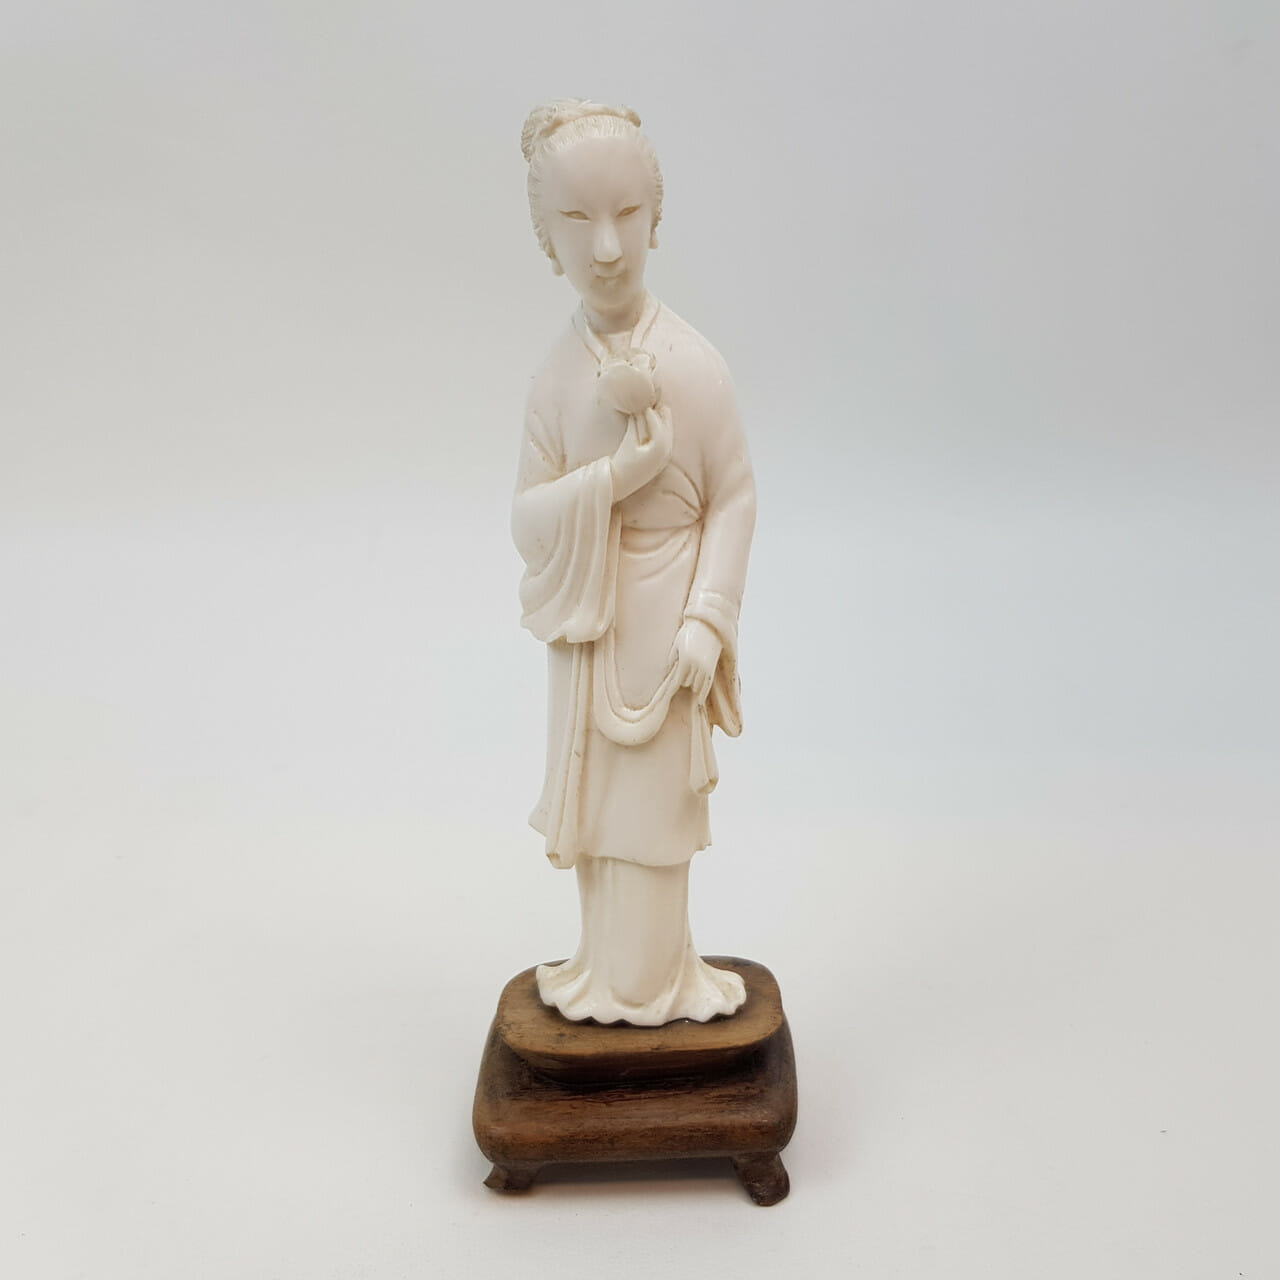 Japanese Lady Carving Statue / Figurine #46496